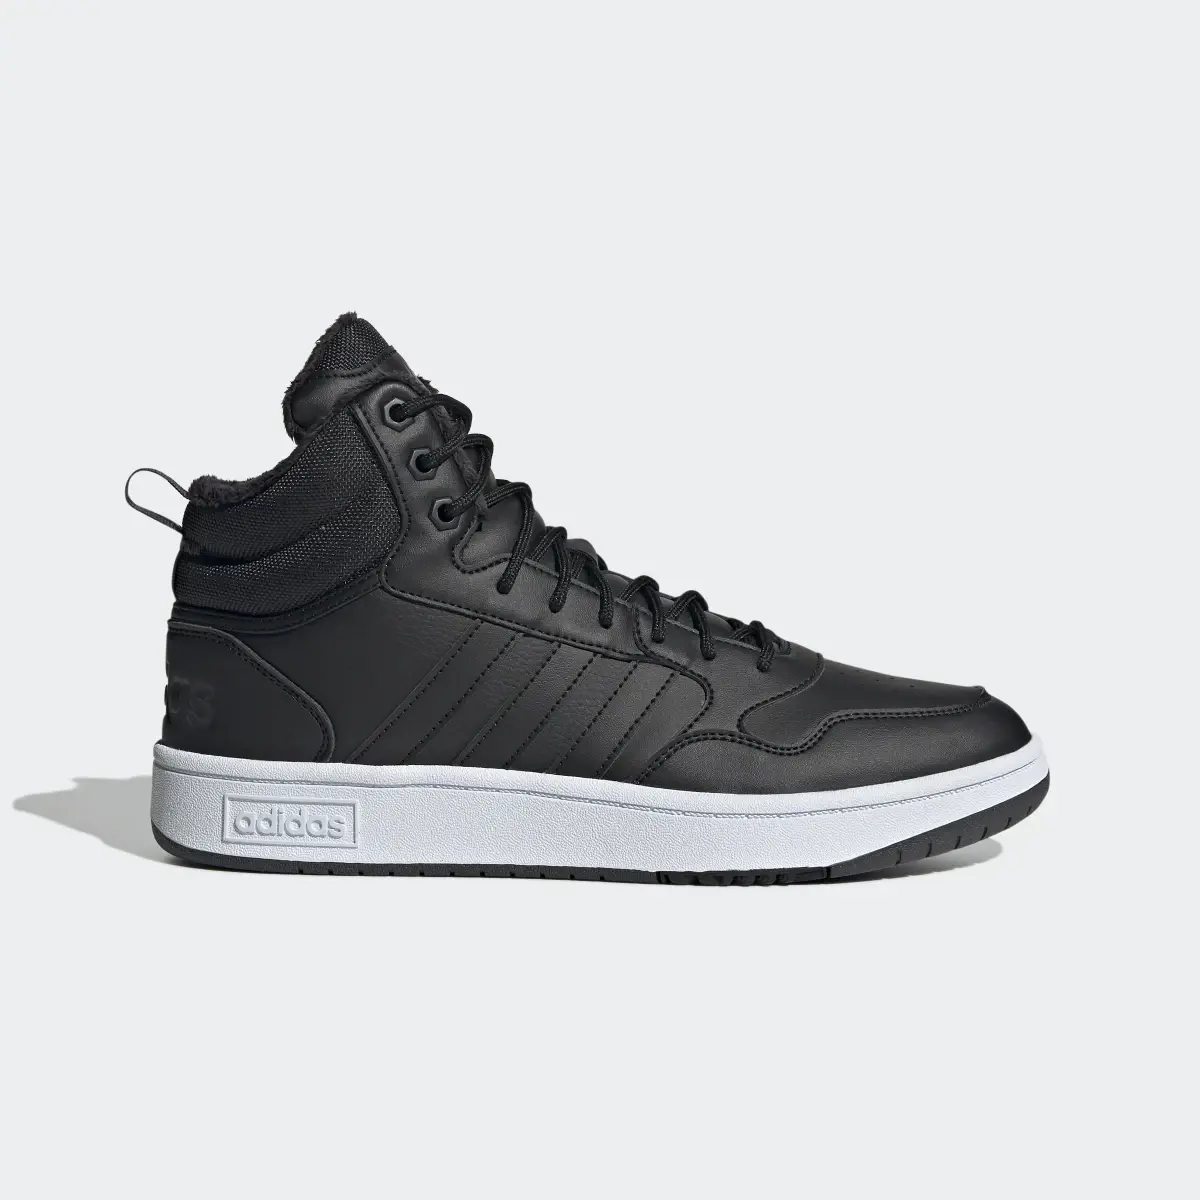 Adidas Hoops 3.0 Mid Classic Fur Lining Winterized Shoes. 2